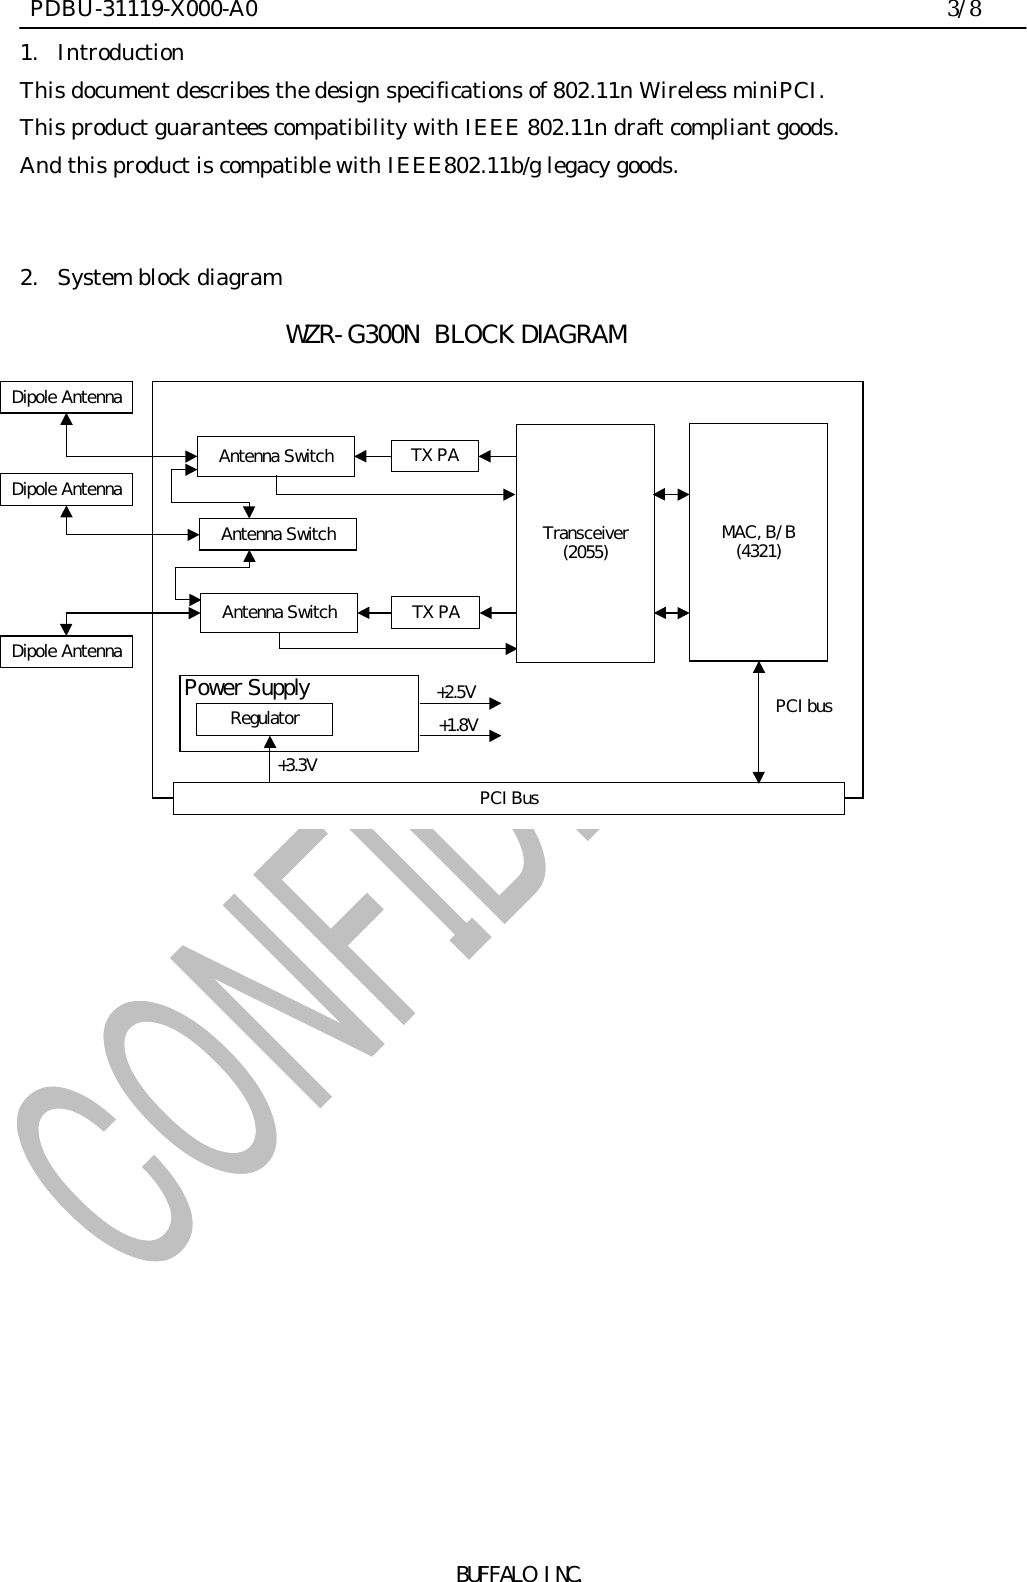  PDBU-31119-X000-A0                                                                3/8BUFFALO INC.1. IntroductionThis document describes the design specifications of 802.11n Wireless miniPCI.This product guarantees compatibility with IEEE 802.11n draft compliant goods.And this product is compatible with IEEE802.11b/g legacy goods.2. System block diagramPower SupplyDipole AntennaAntenna Switch TX PAAntenna SwitchPCI BusRegulator PCI bus+3.3V+2.5V+1.8VWZR-G300N  BLOCK DIAGRAMDipole AntennaDipole AntennaAntenna SwitchTX PAMAC, B/B(4321)Transceiver(2055)